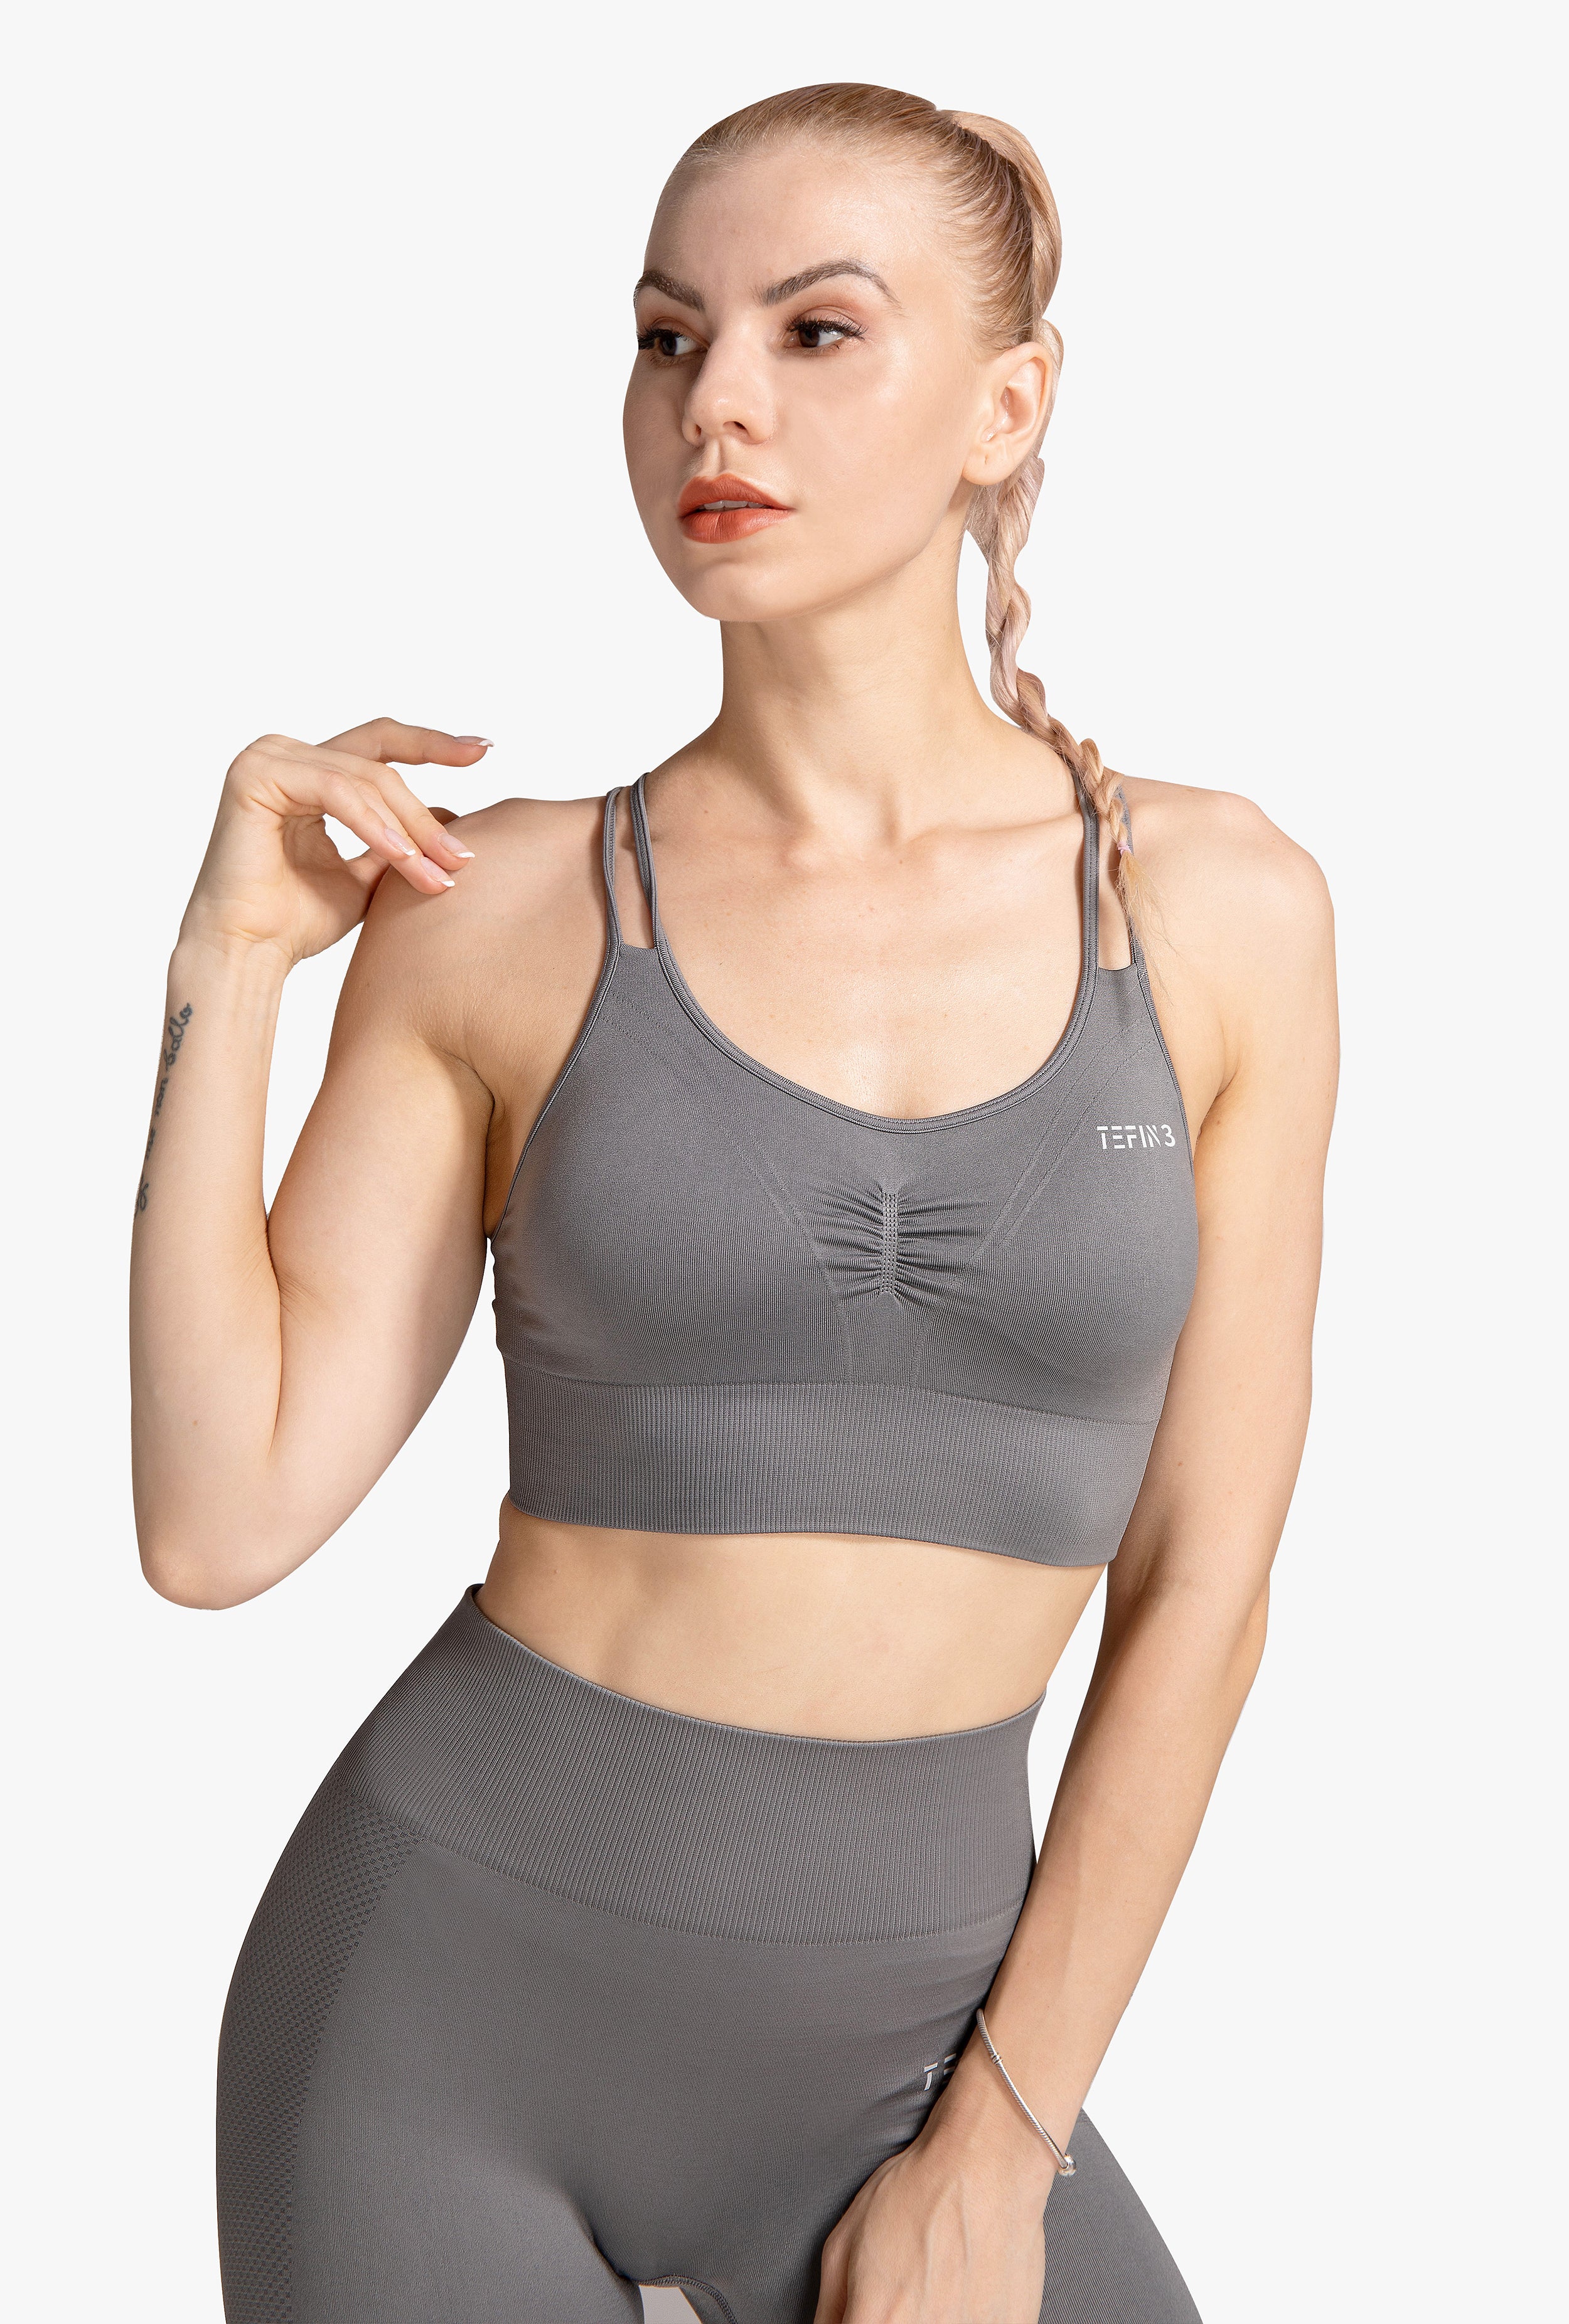 Grace Form Strappy Padded High Sports Bra (Small size) only $7.99